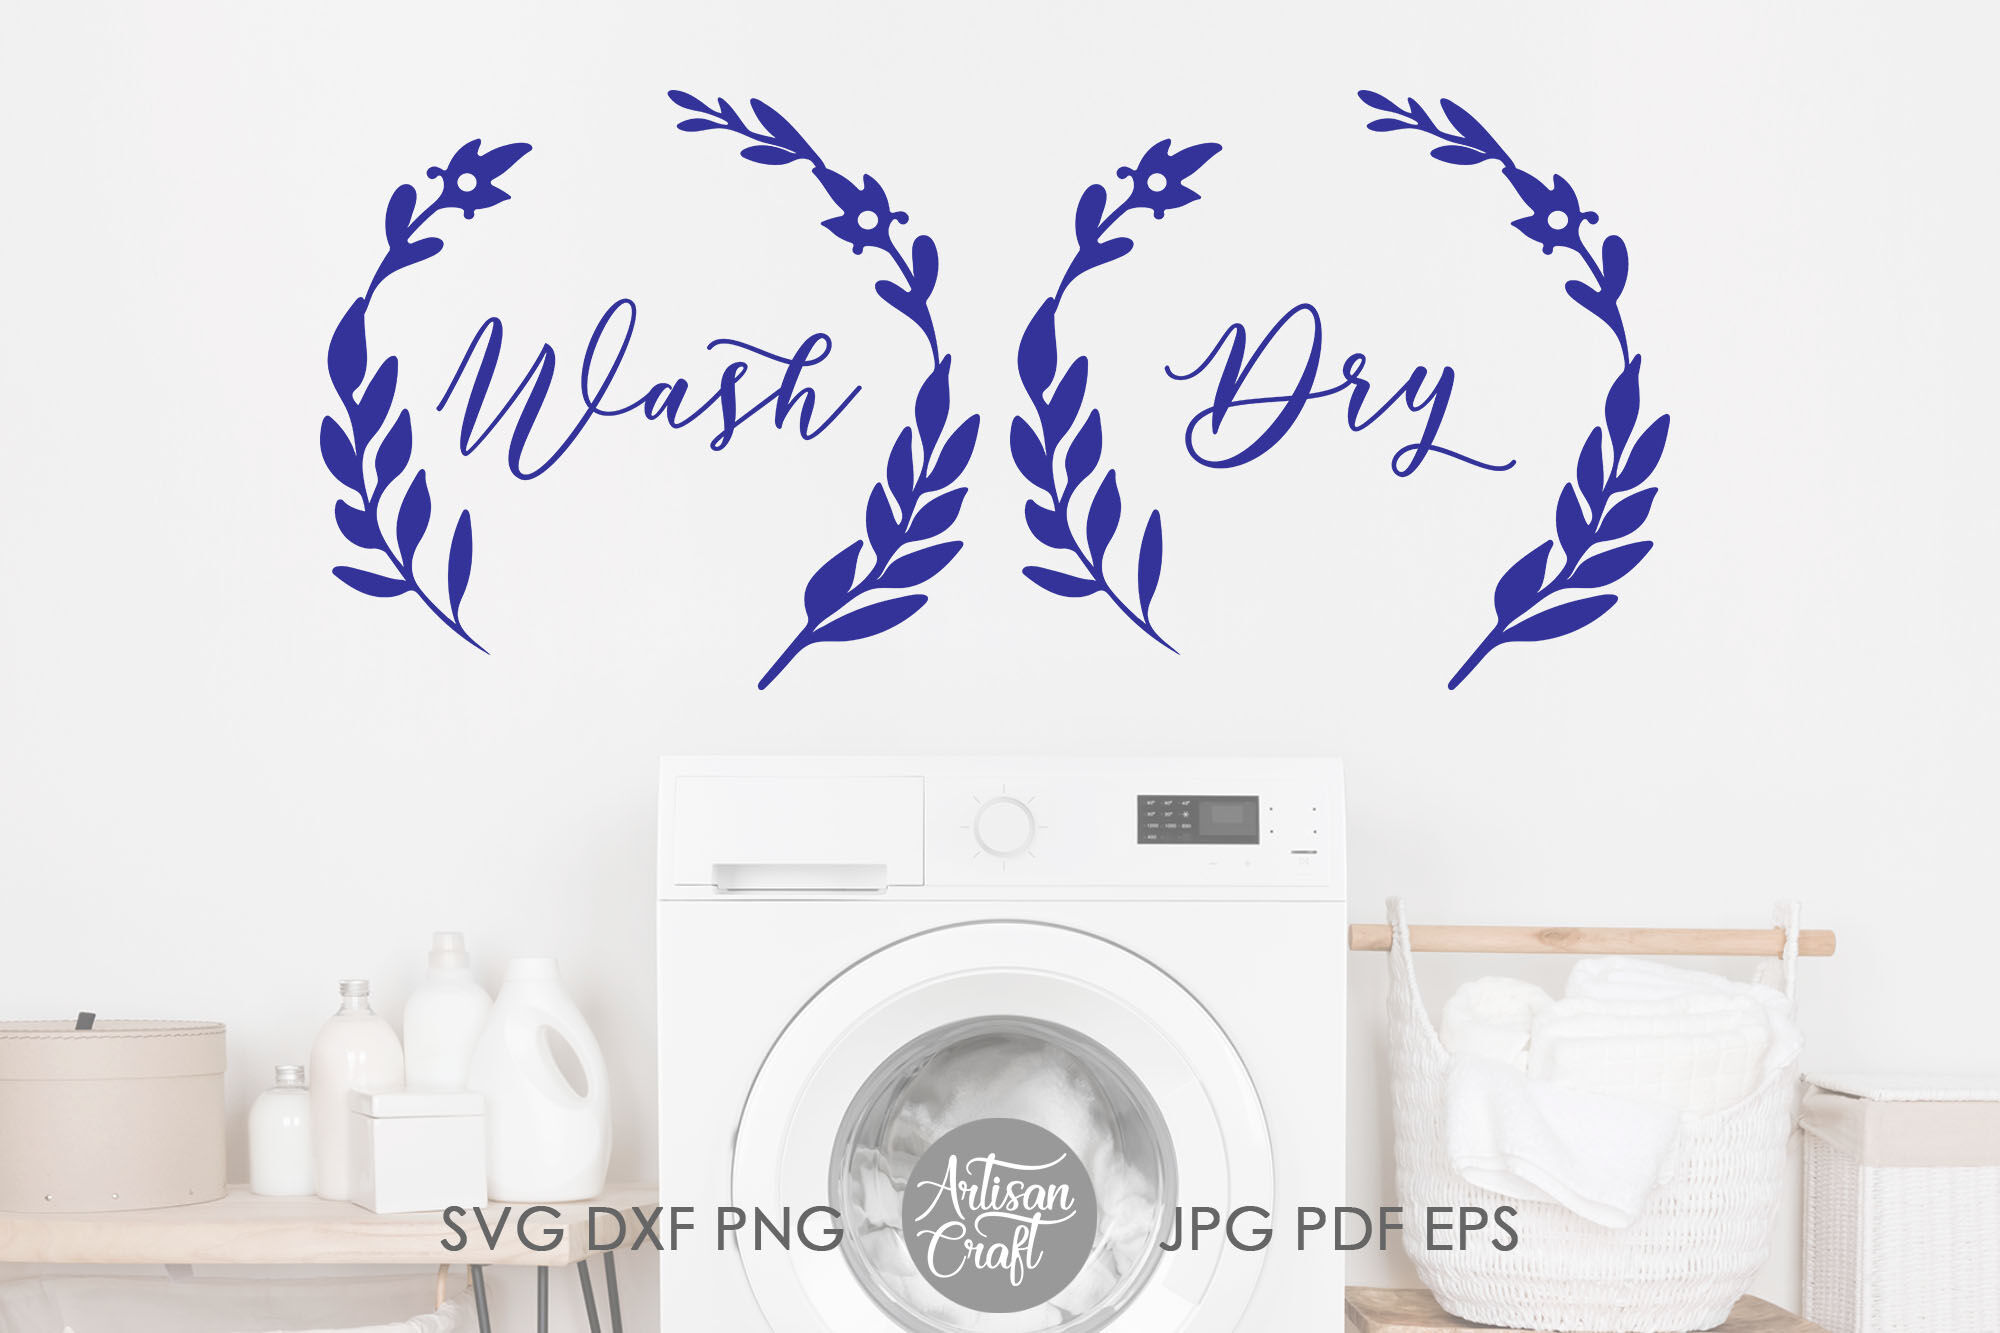 Washing Machine Svg, Laundry Png, Washer Clipart, Laundry Machine Dxf,  Laundry Eps, Laundry Cricut, Washer Cut File, Washer Silhouette 